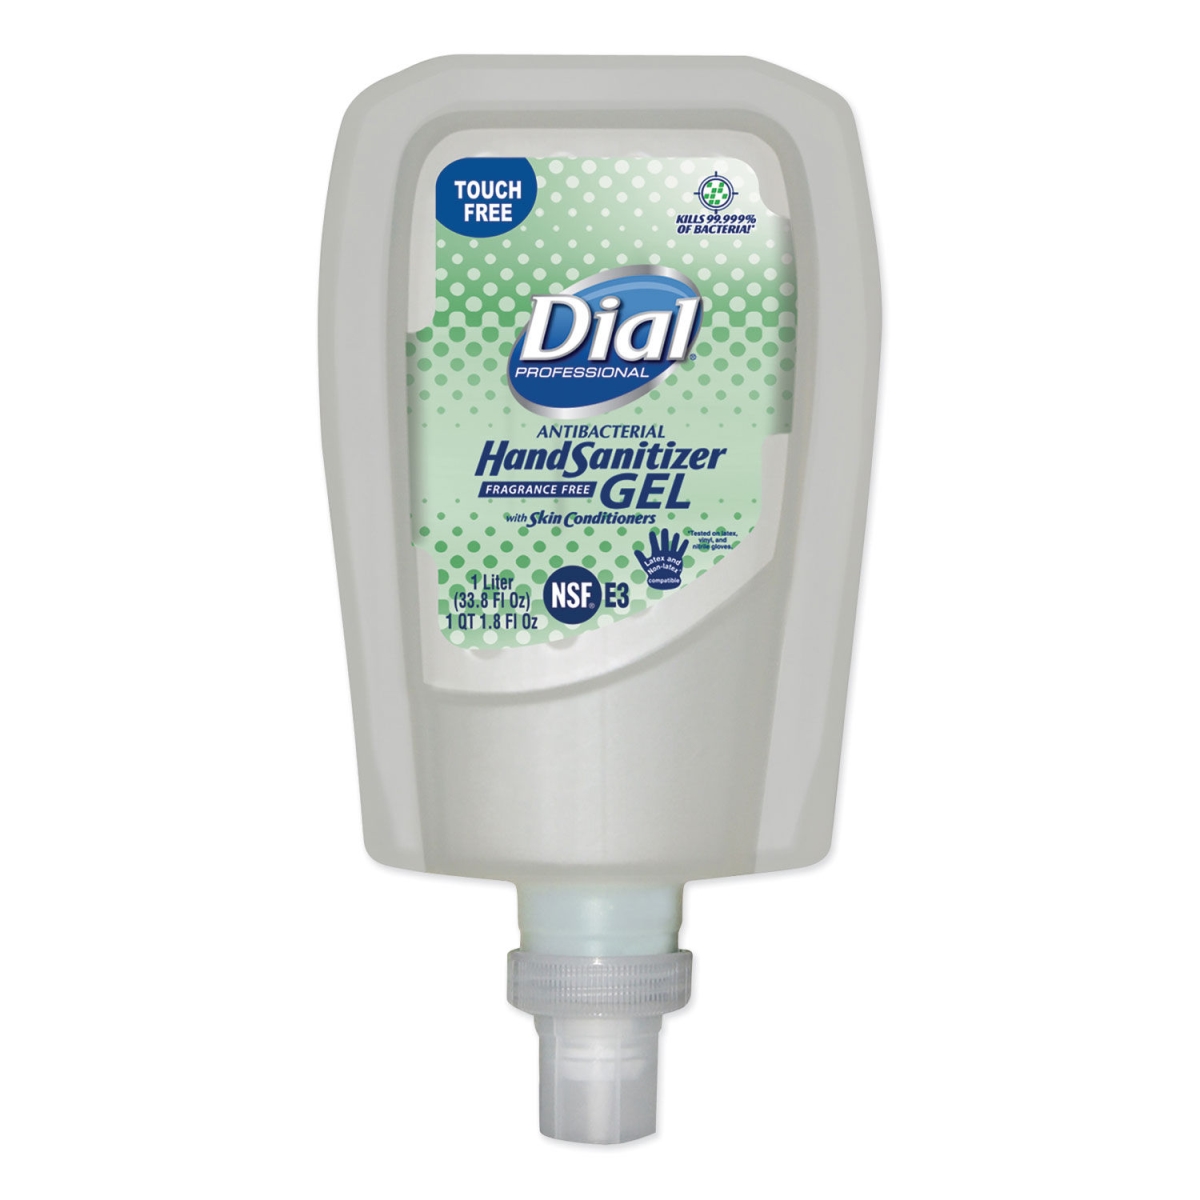 Picture of Dial Professional DIA19029 hygienic Gel Hand Sanitizer Refill for FIT Touch Free Dispenser